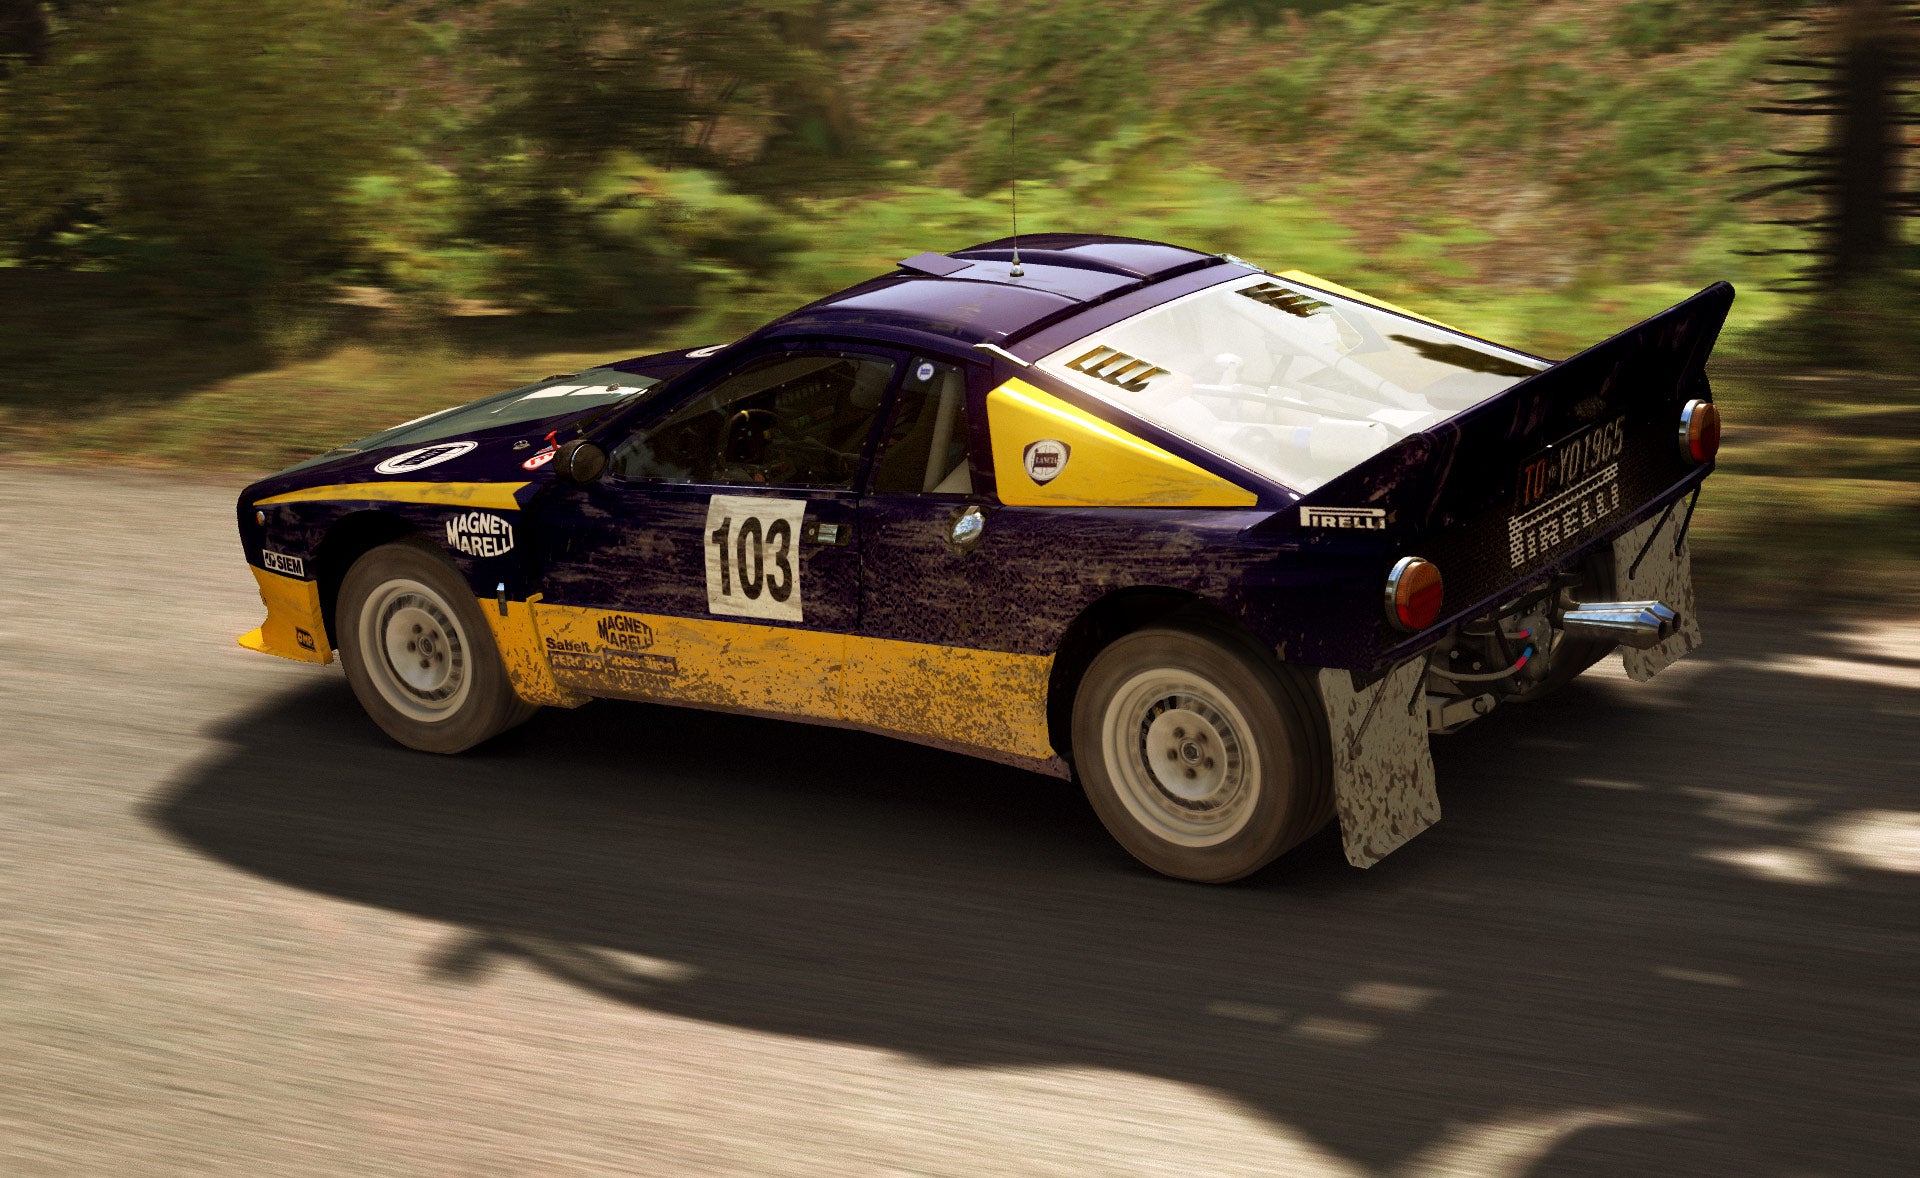 Image for "The plan was always to slowly increase the price," says Dirt Rally developer